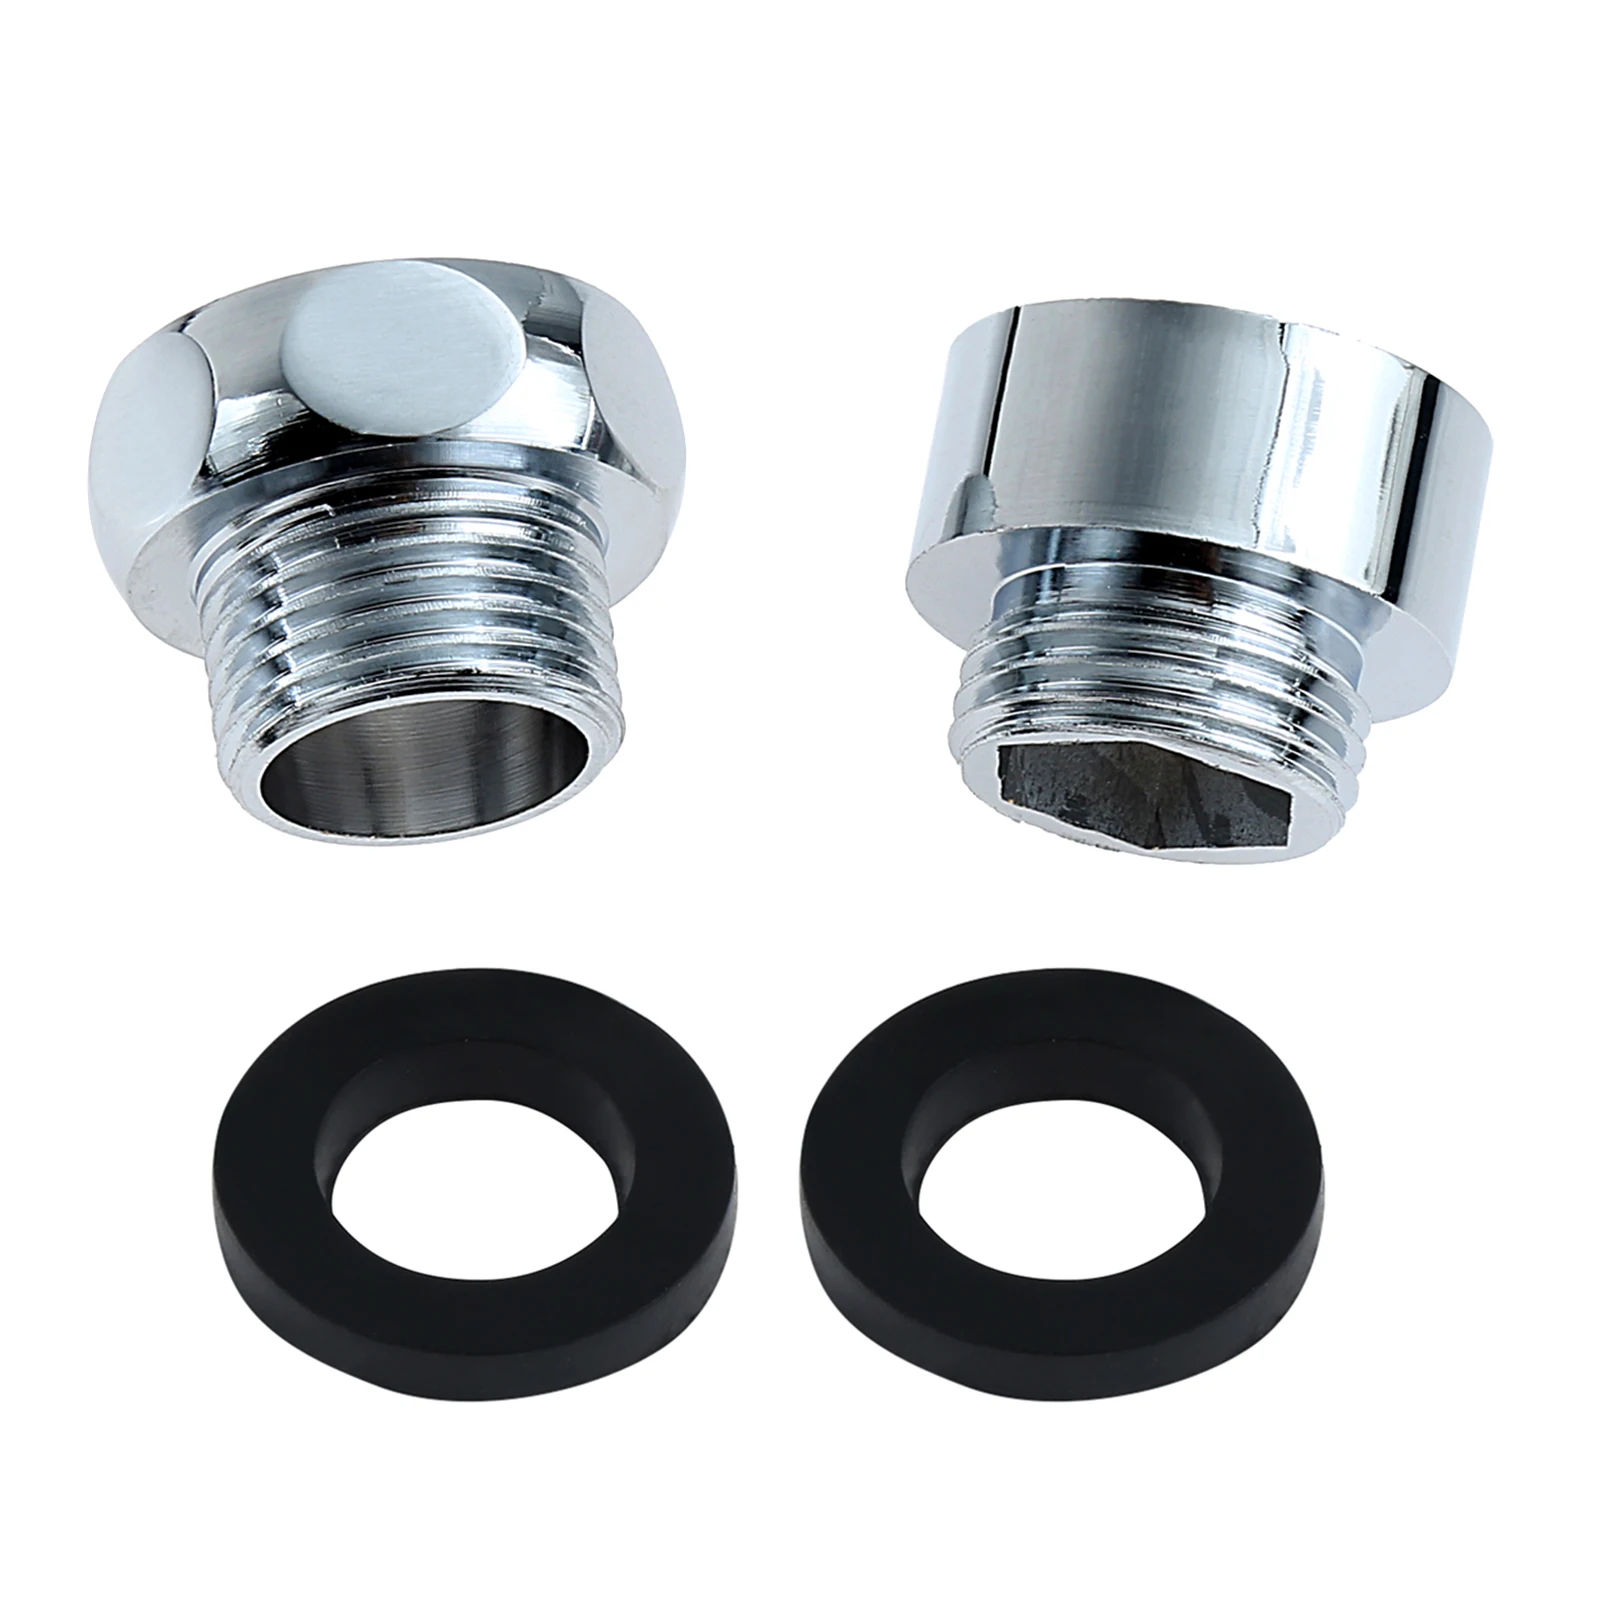 

Copper Faucet Hose Adapter Water Tap Aerator Switch Connector Hexagon/Round Thread Joints Kitchen Bathroom Fittings 25mm to 20mm